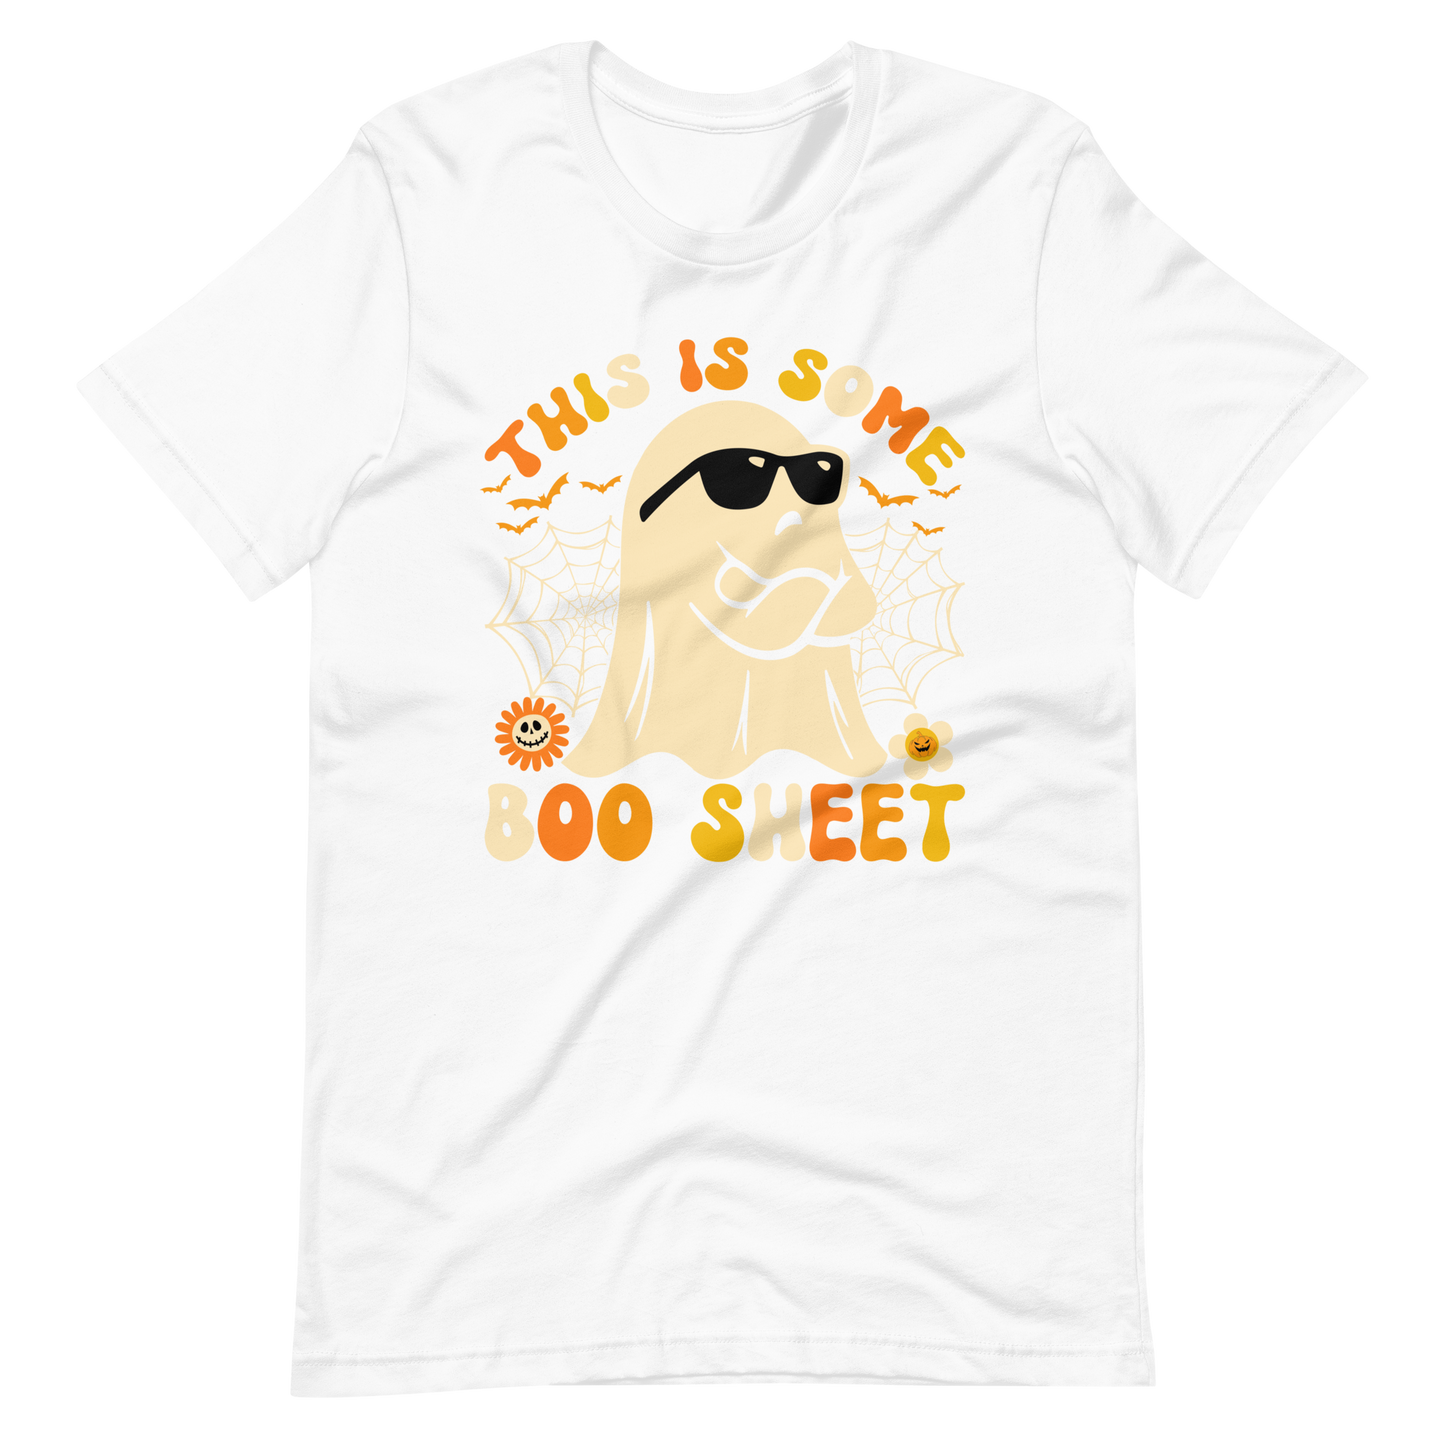 This is some boo sheet | Unisex T-shirt